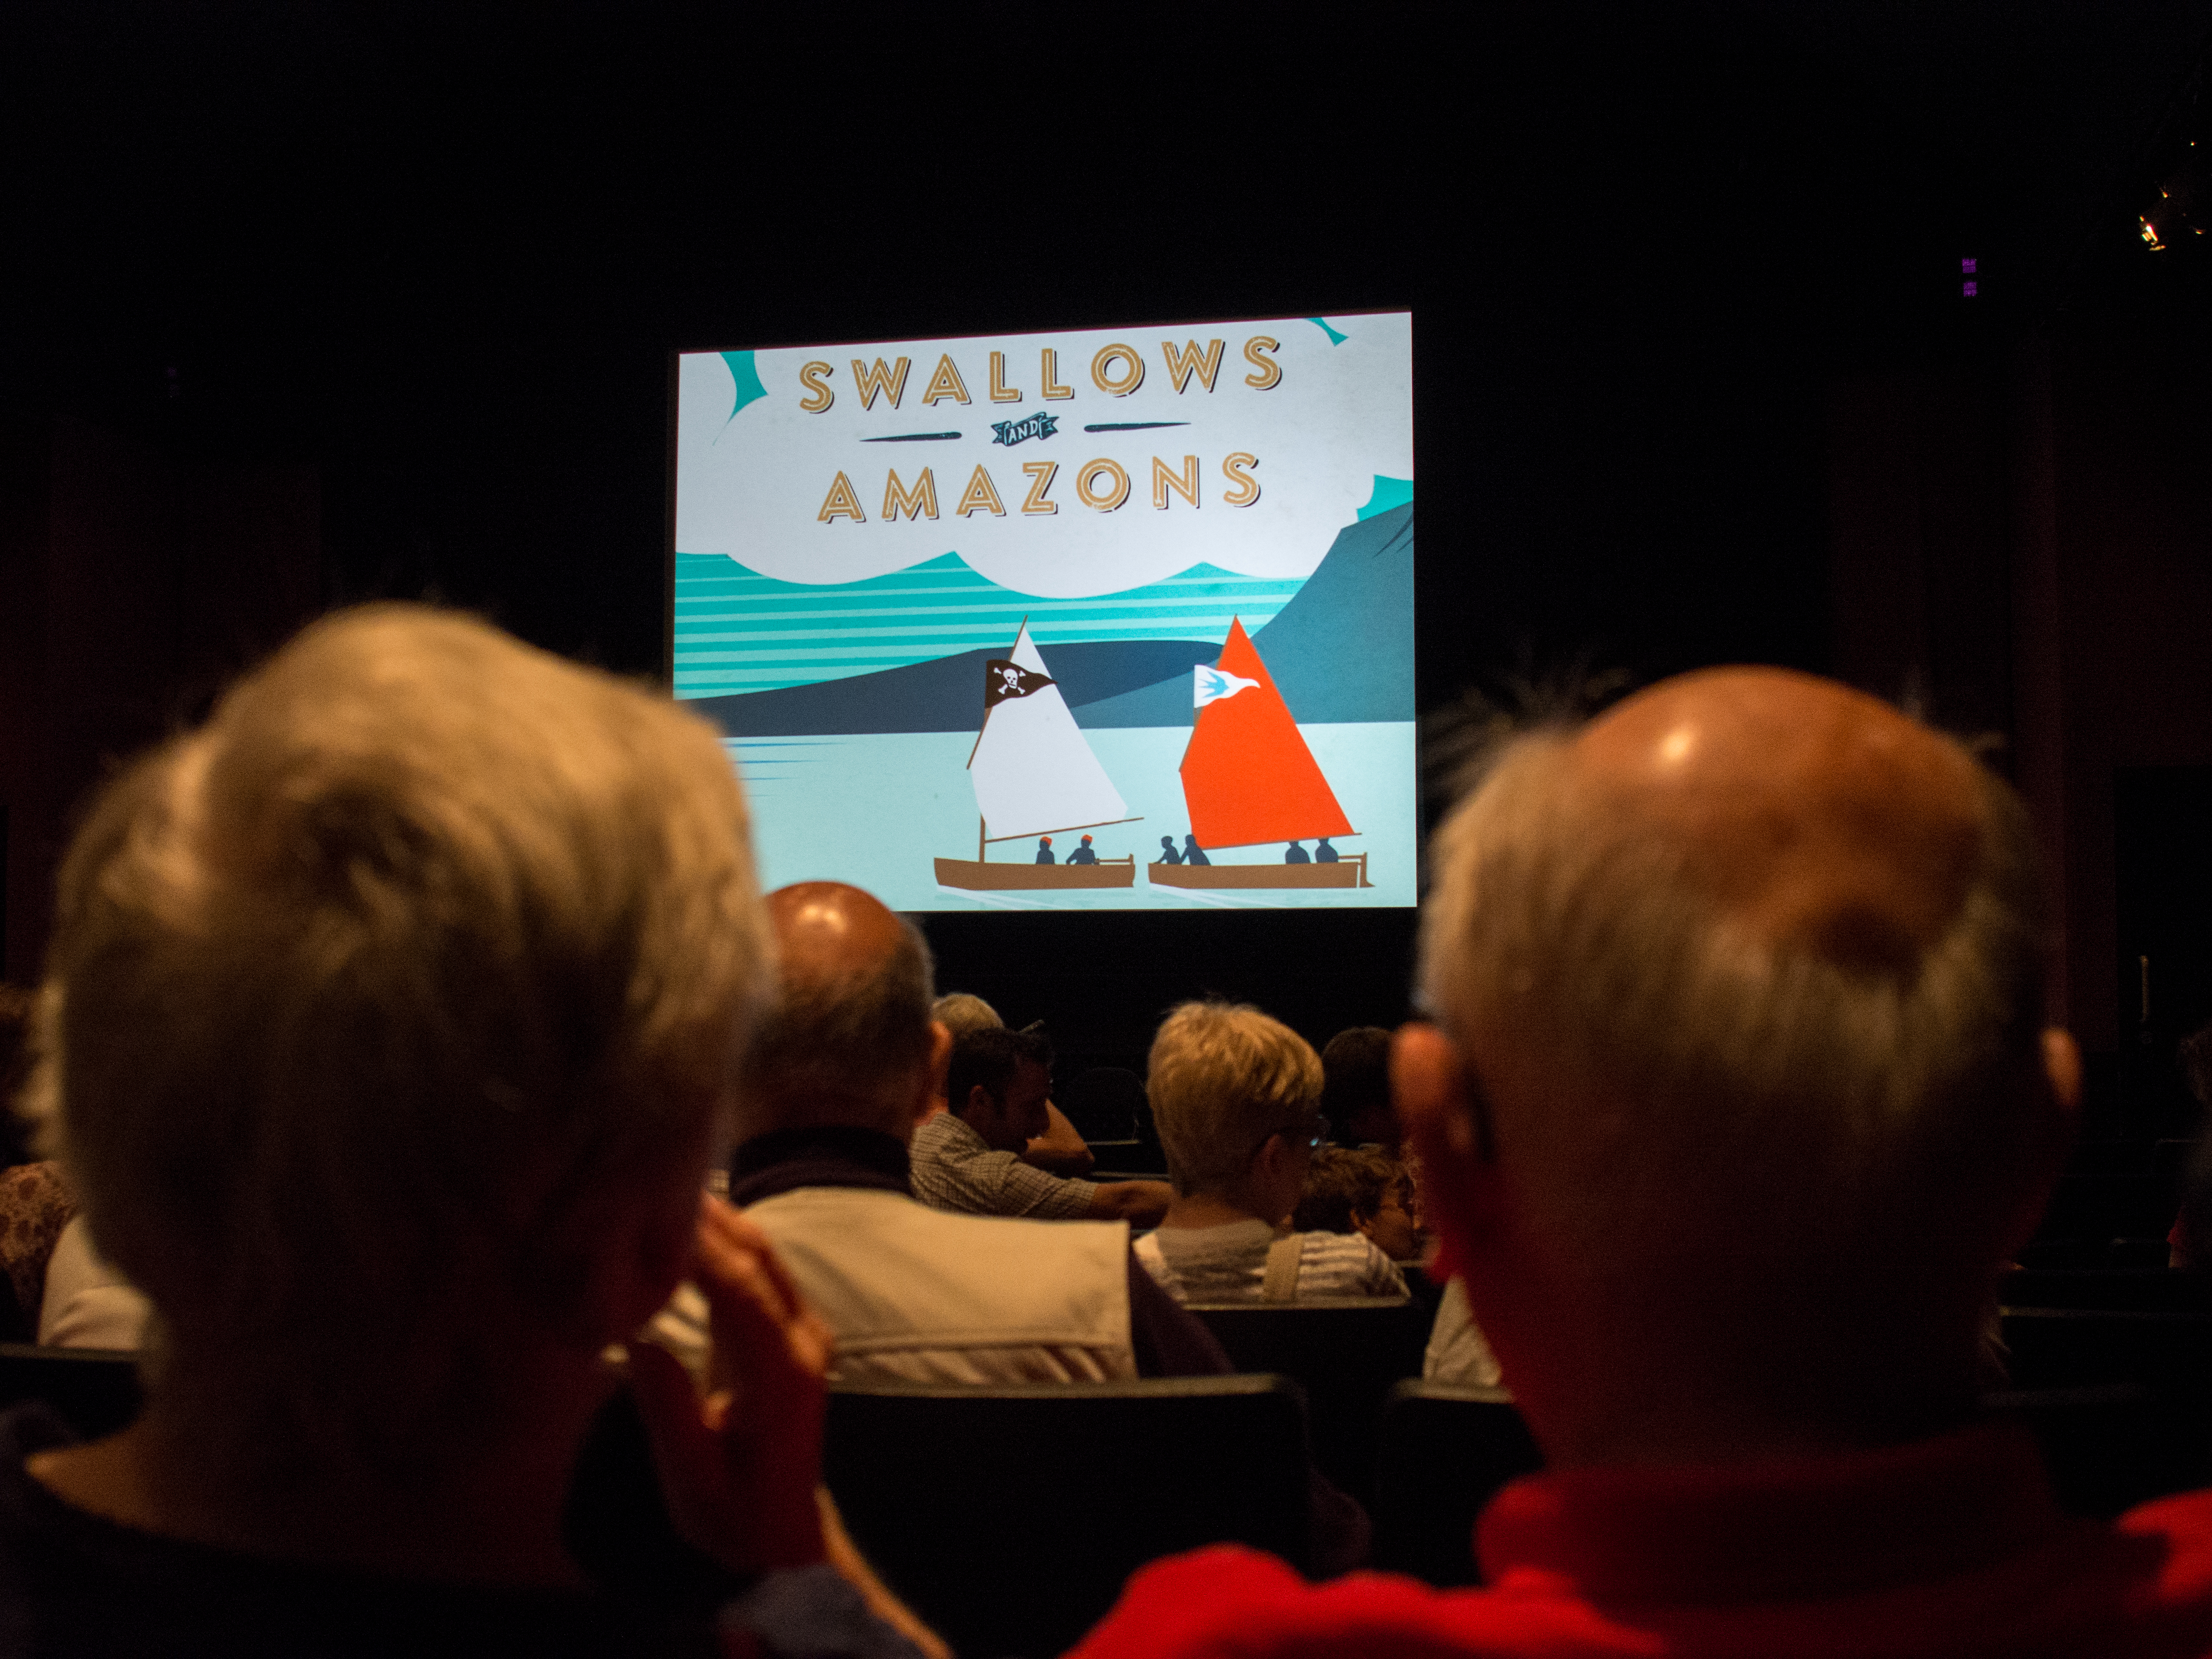 40th Anniversary cinema screening of 'Swallows & Amazons'(1974) with Q&A by Sophie Neville